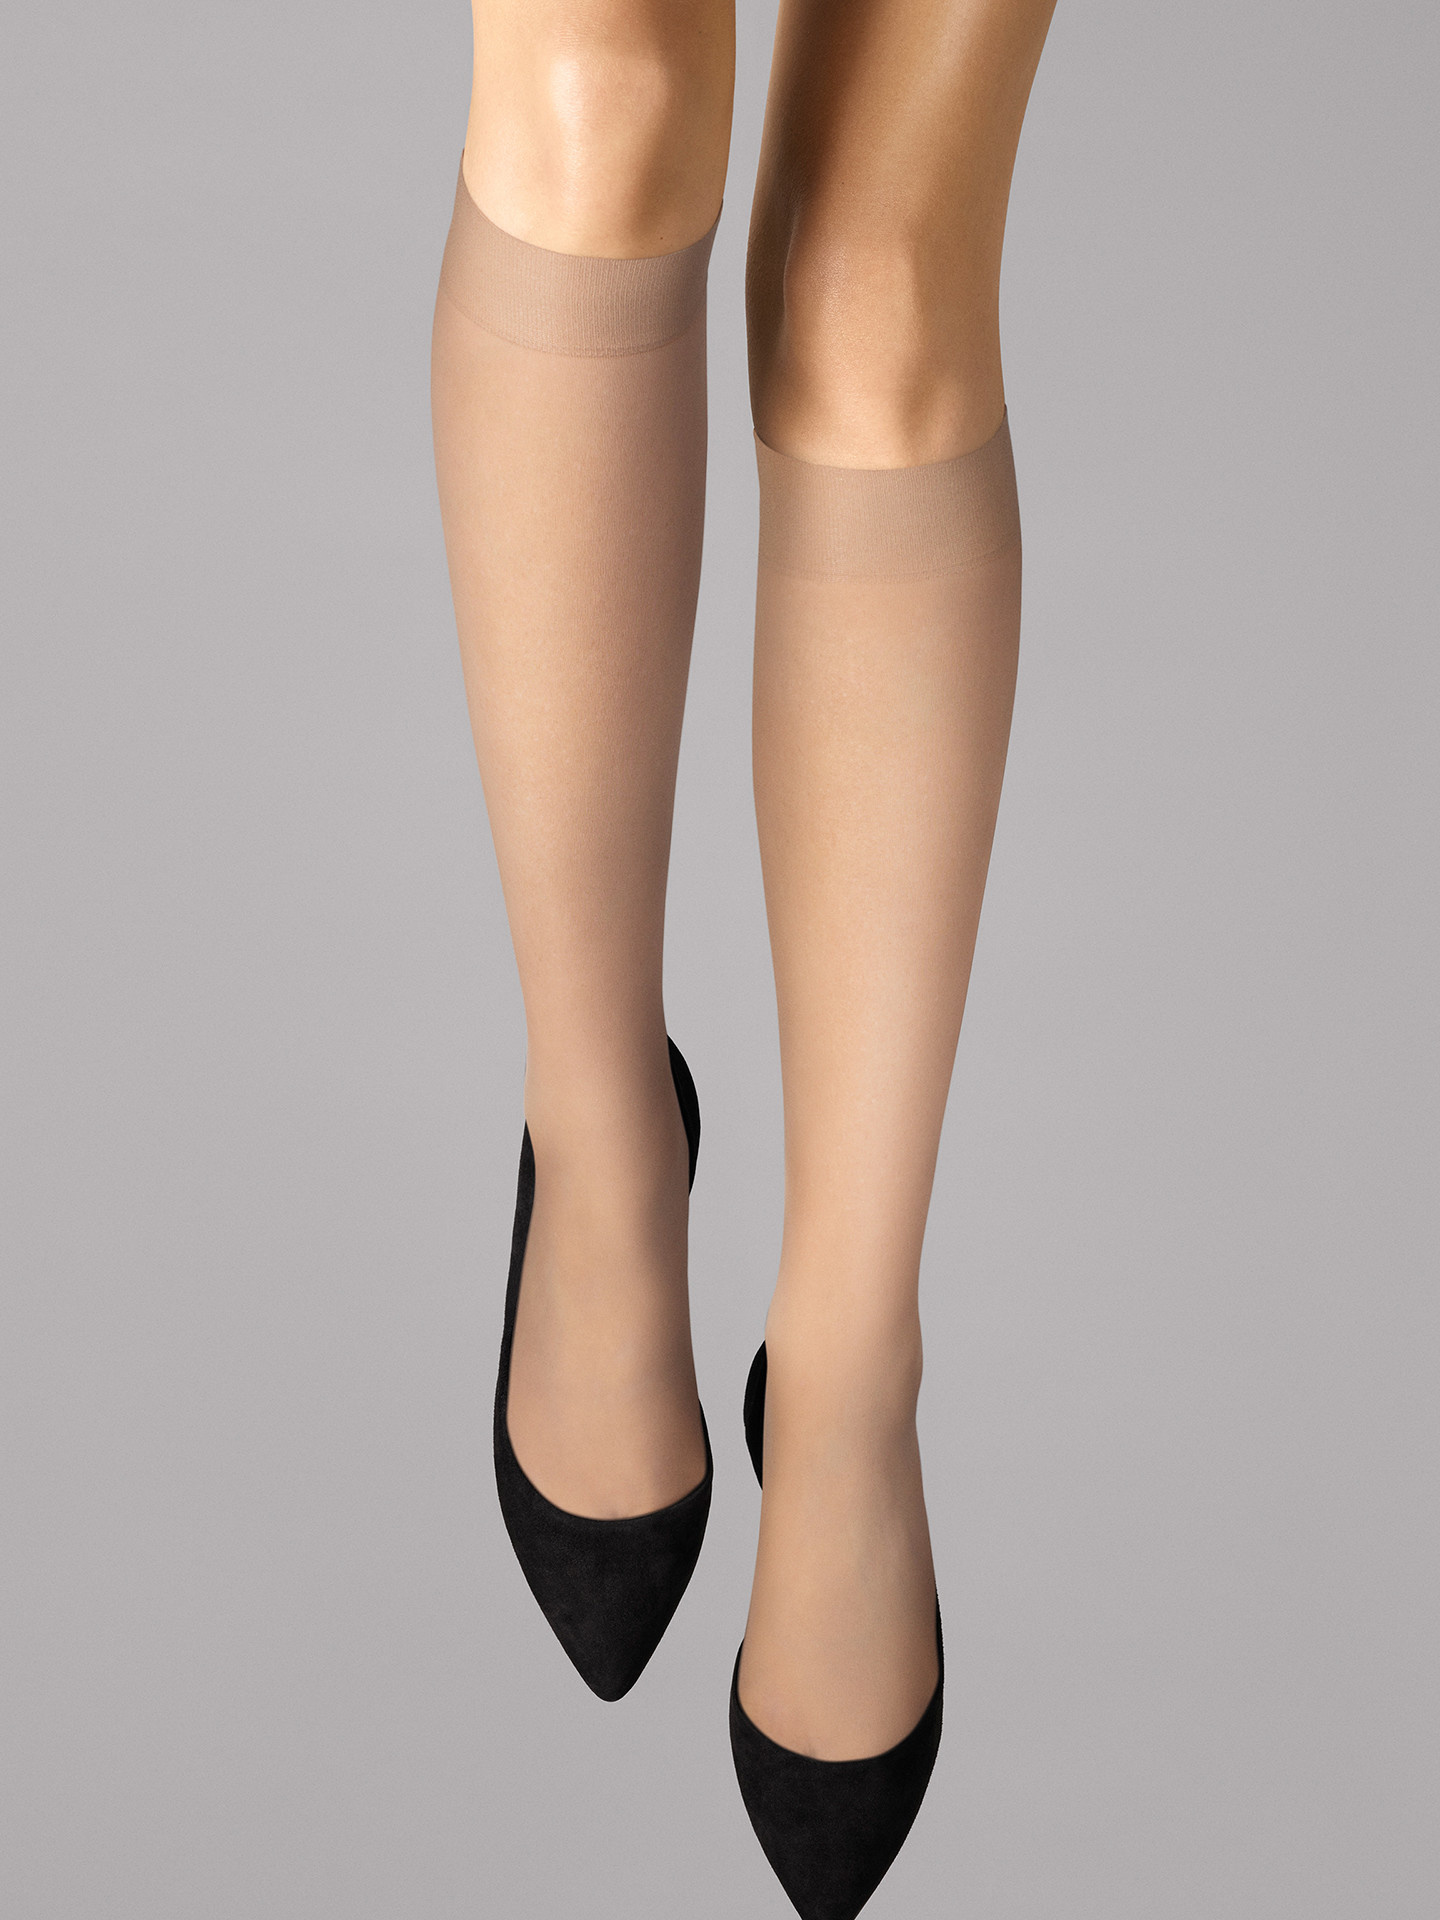 Invisible Compression Socks - Knee High + Sheer